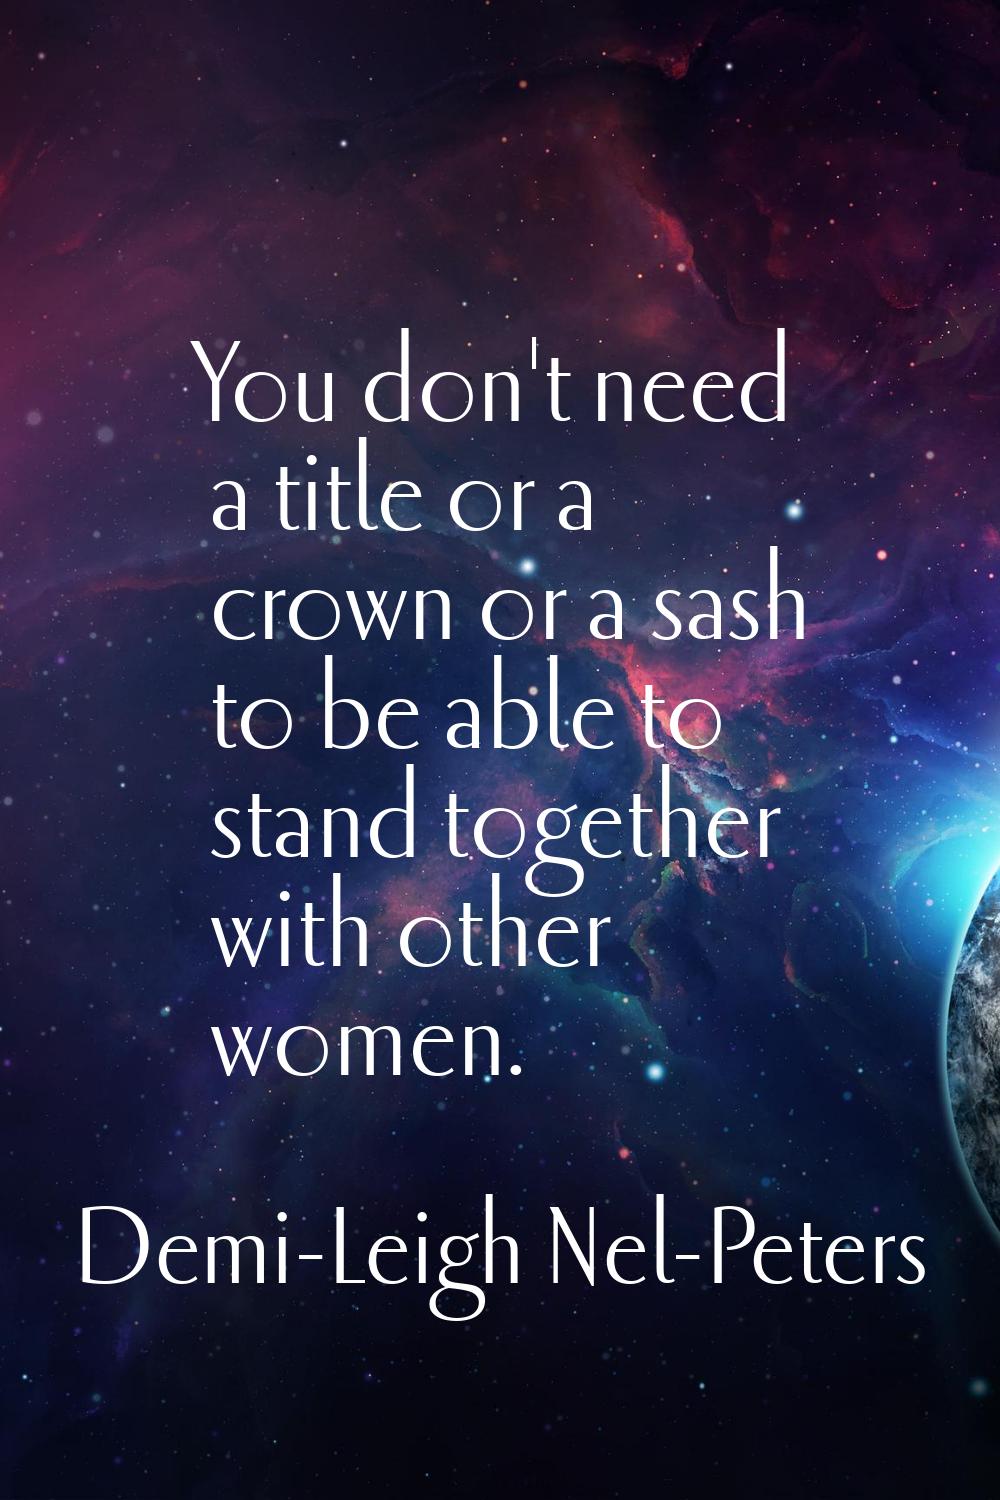 You don't need a title or a crown or a sash to be able to stand together with other women.